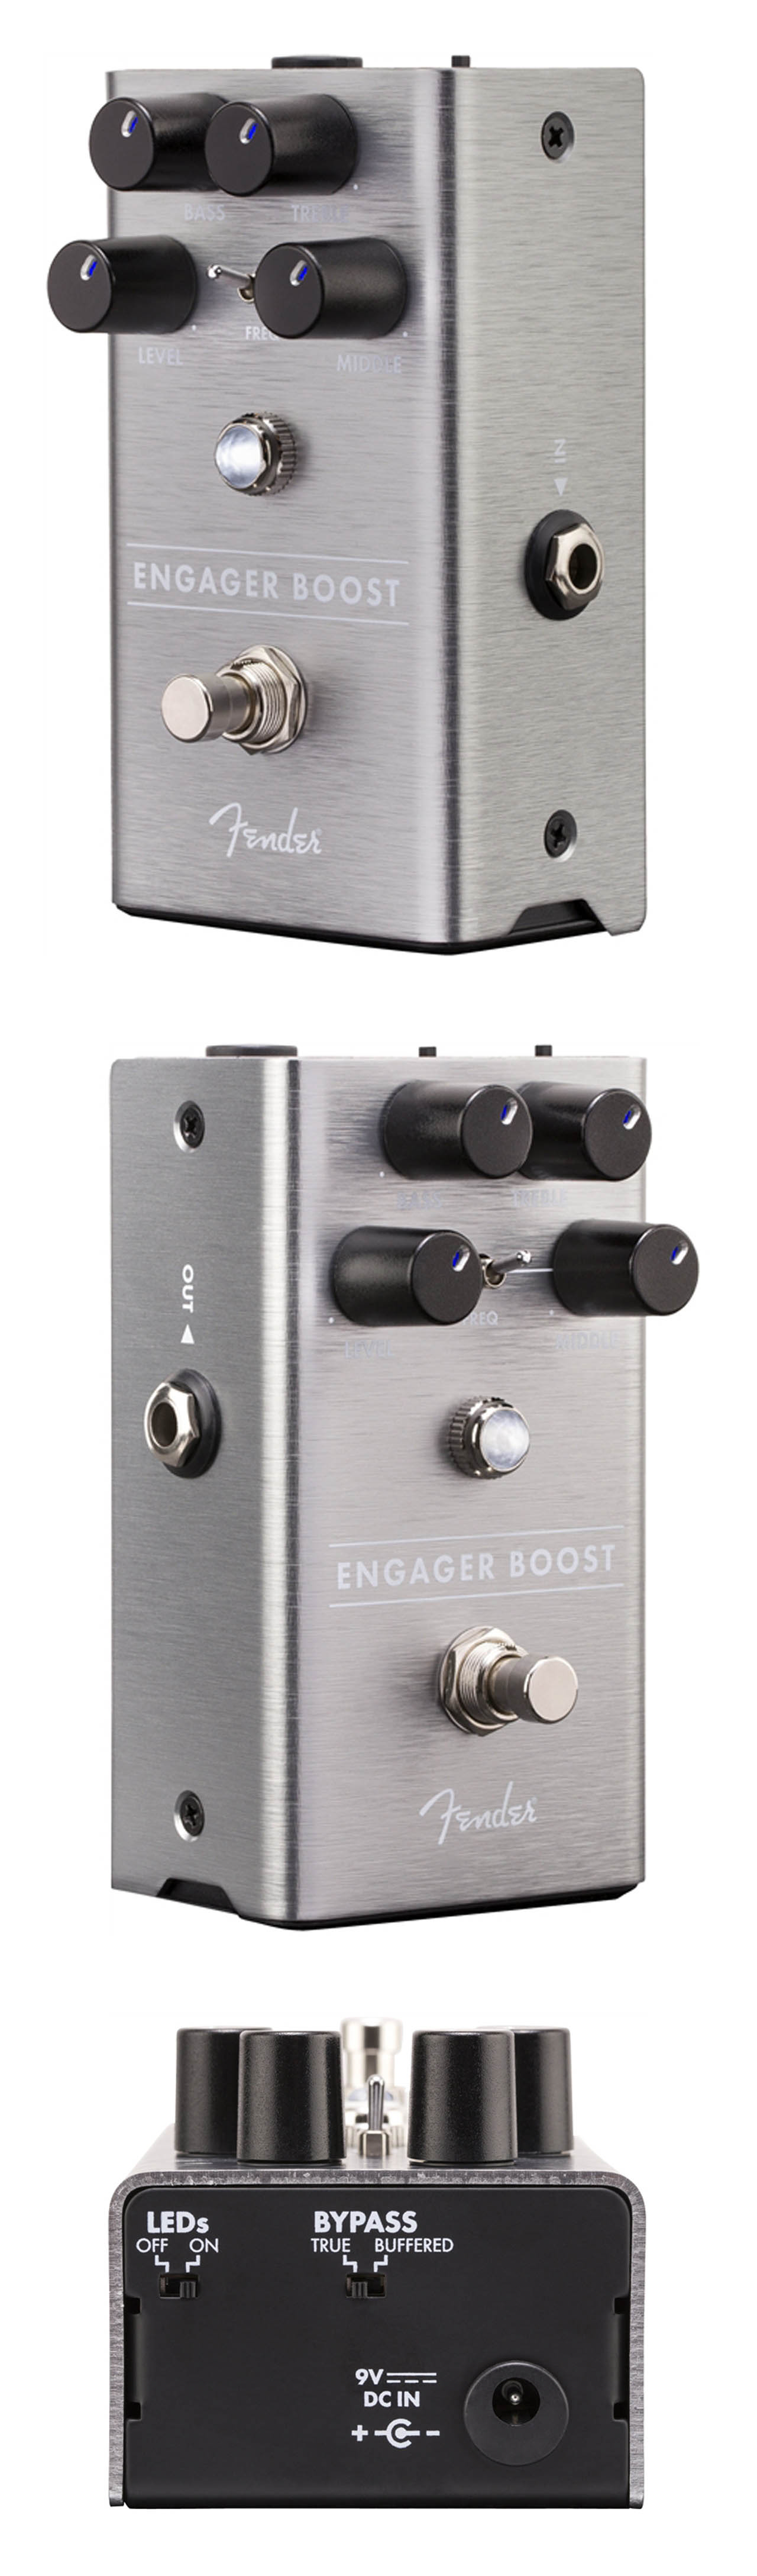 Fender Engager Boost|-海國樂器-代理品牌